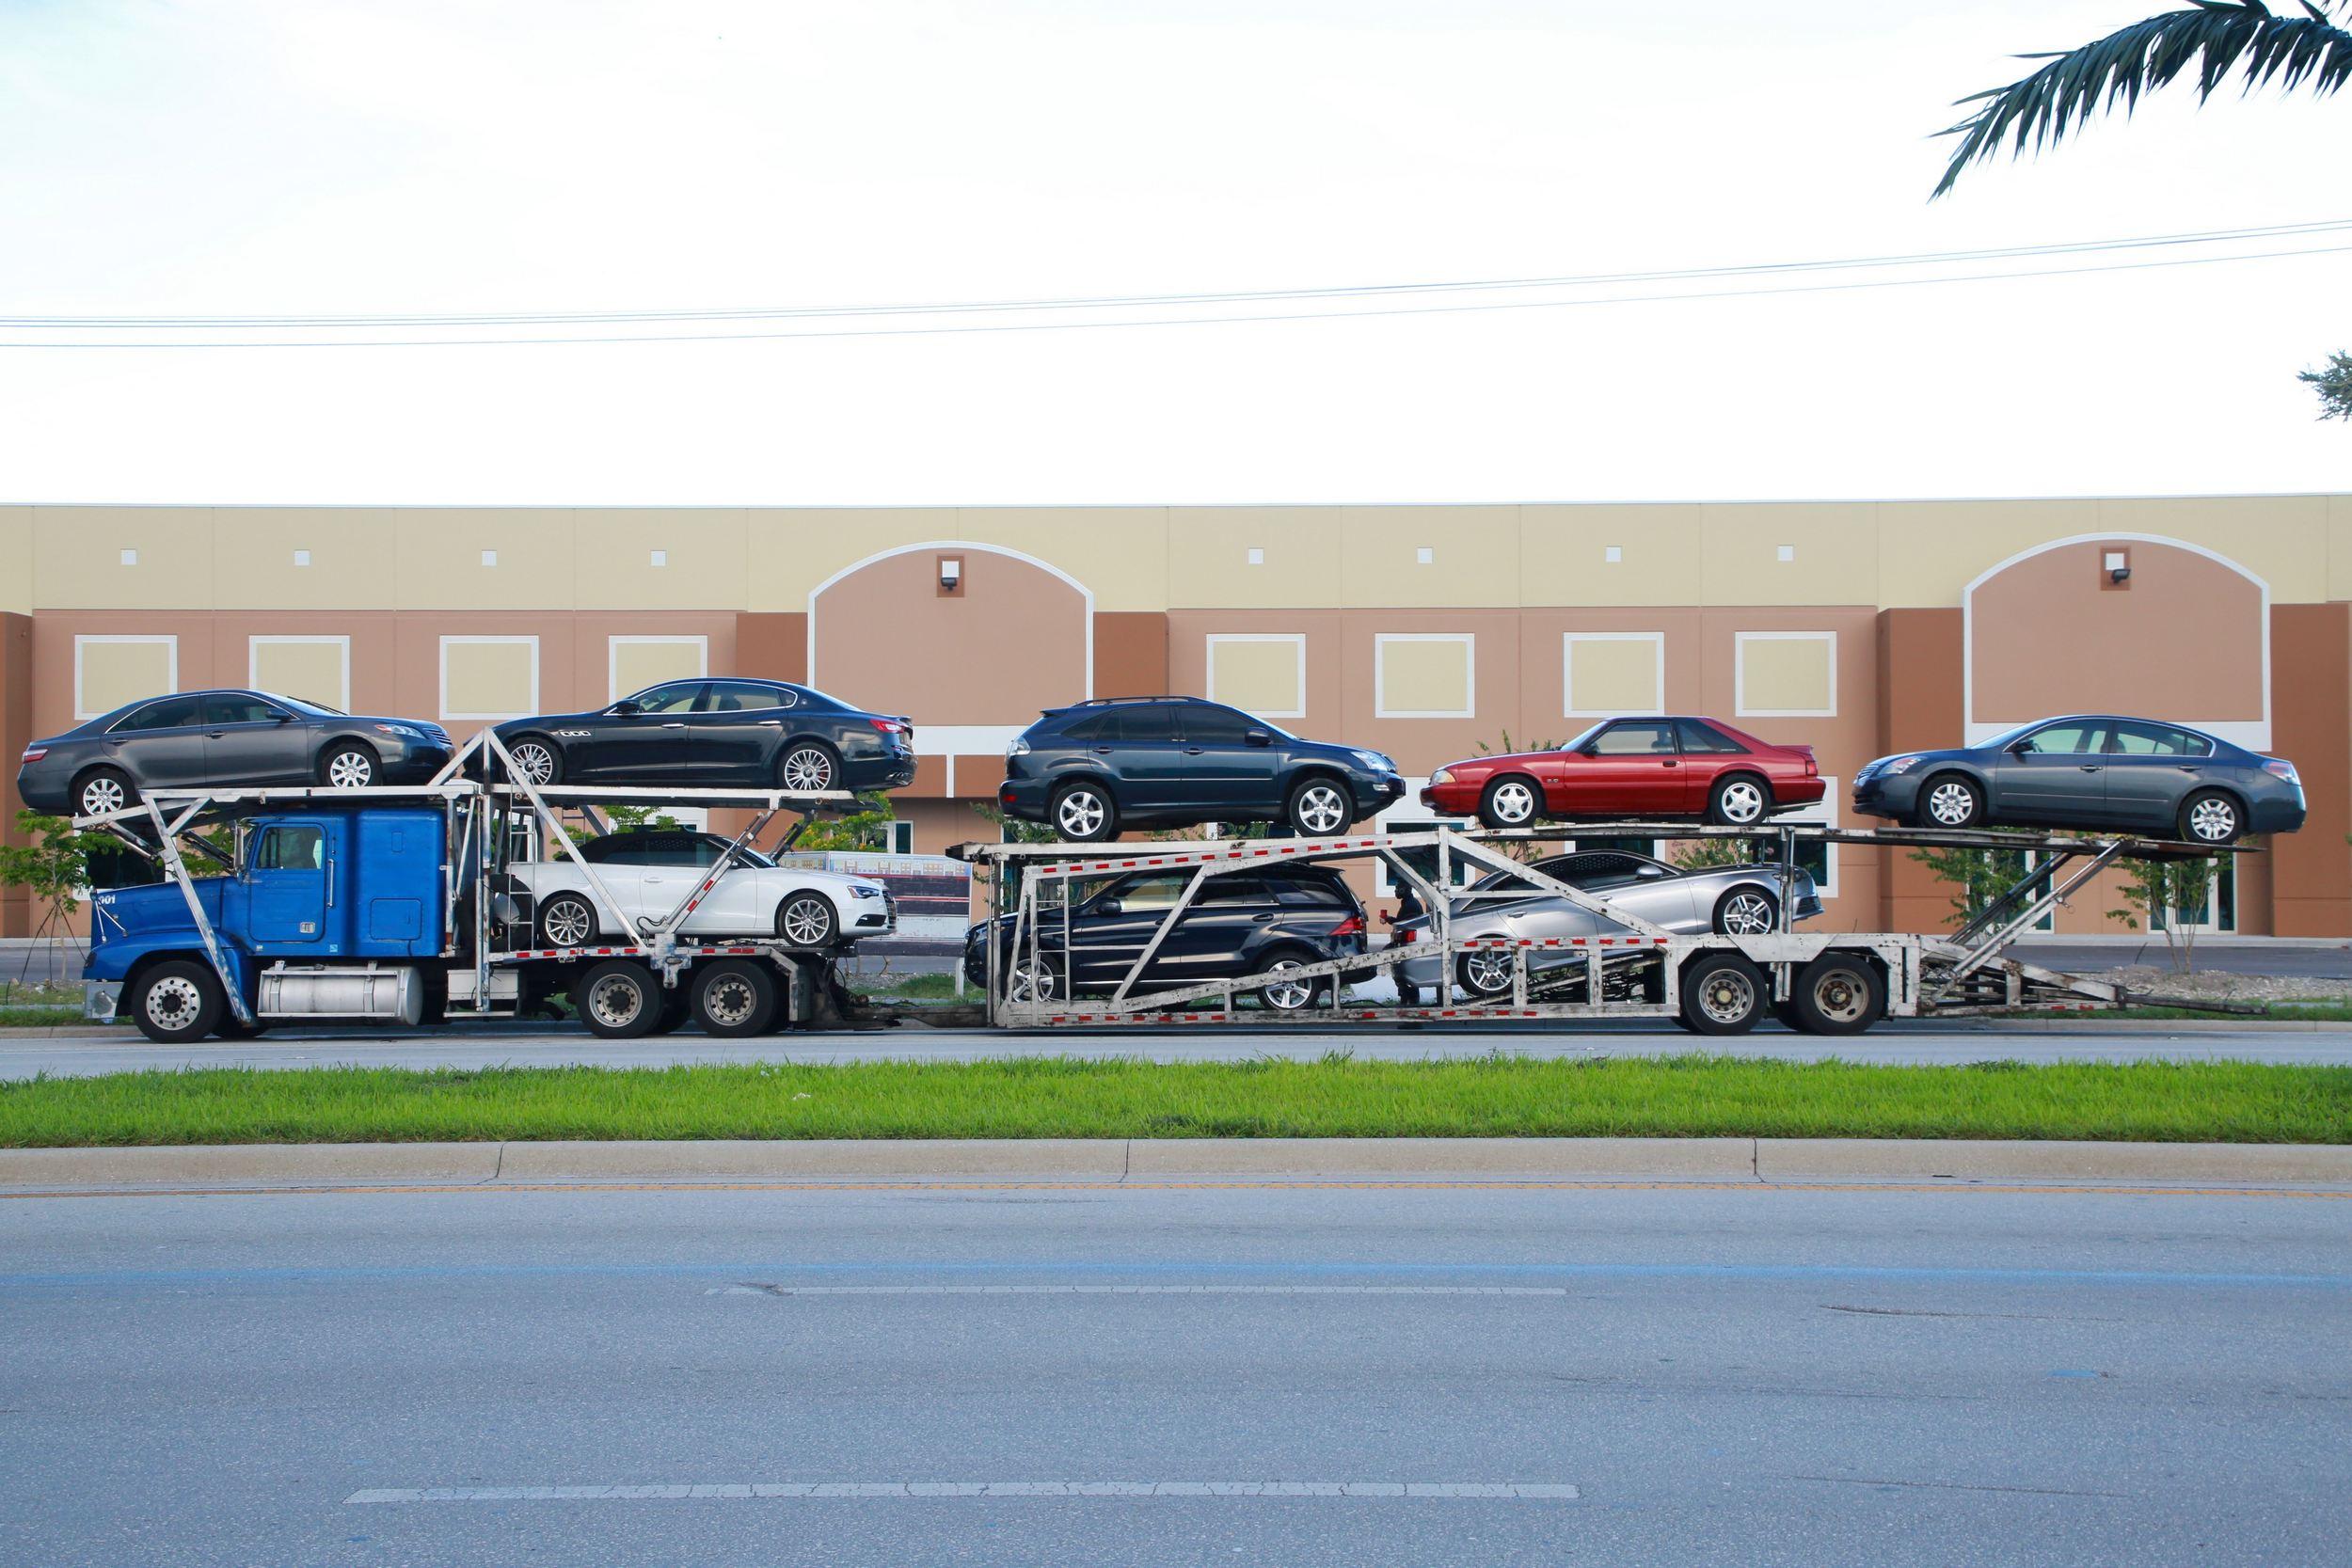 Article How to Choose a Better Car Shipping Company that Delivers